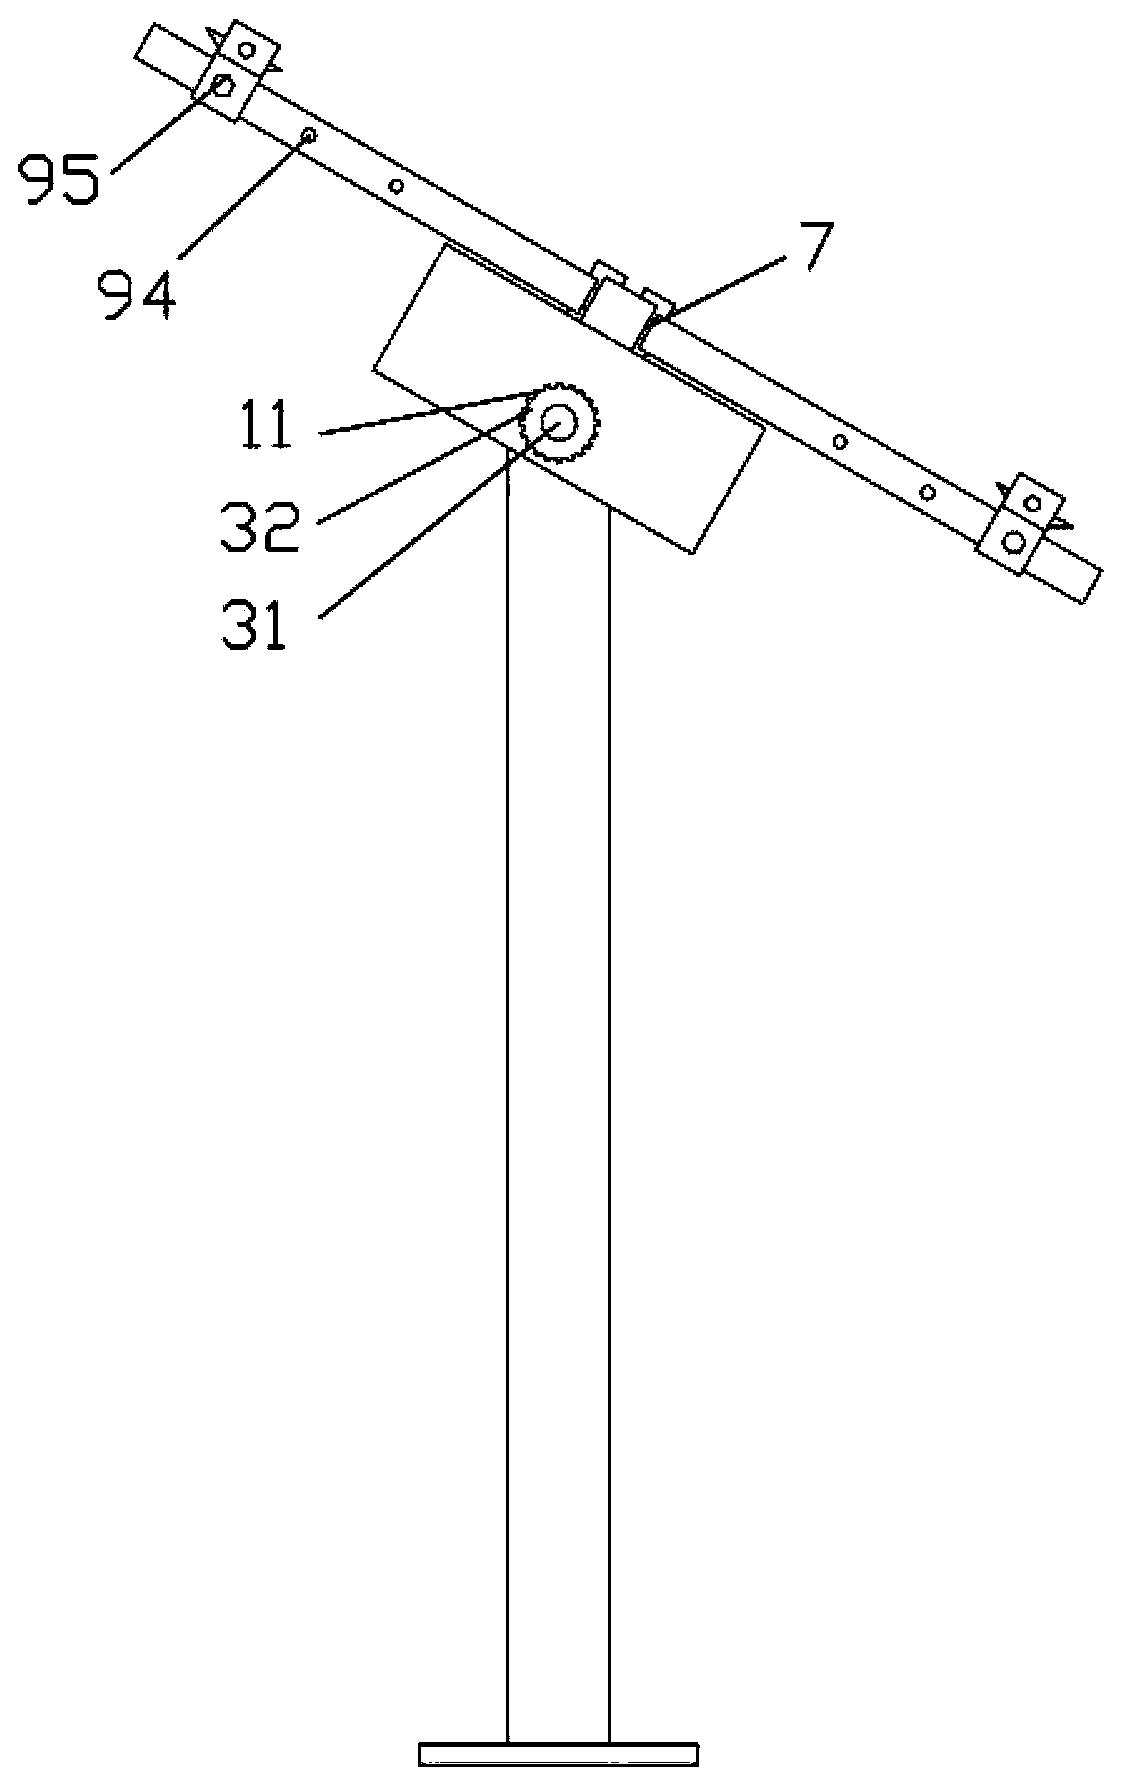 Splicing and fixing device for photovoltaic panels